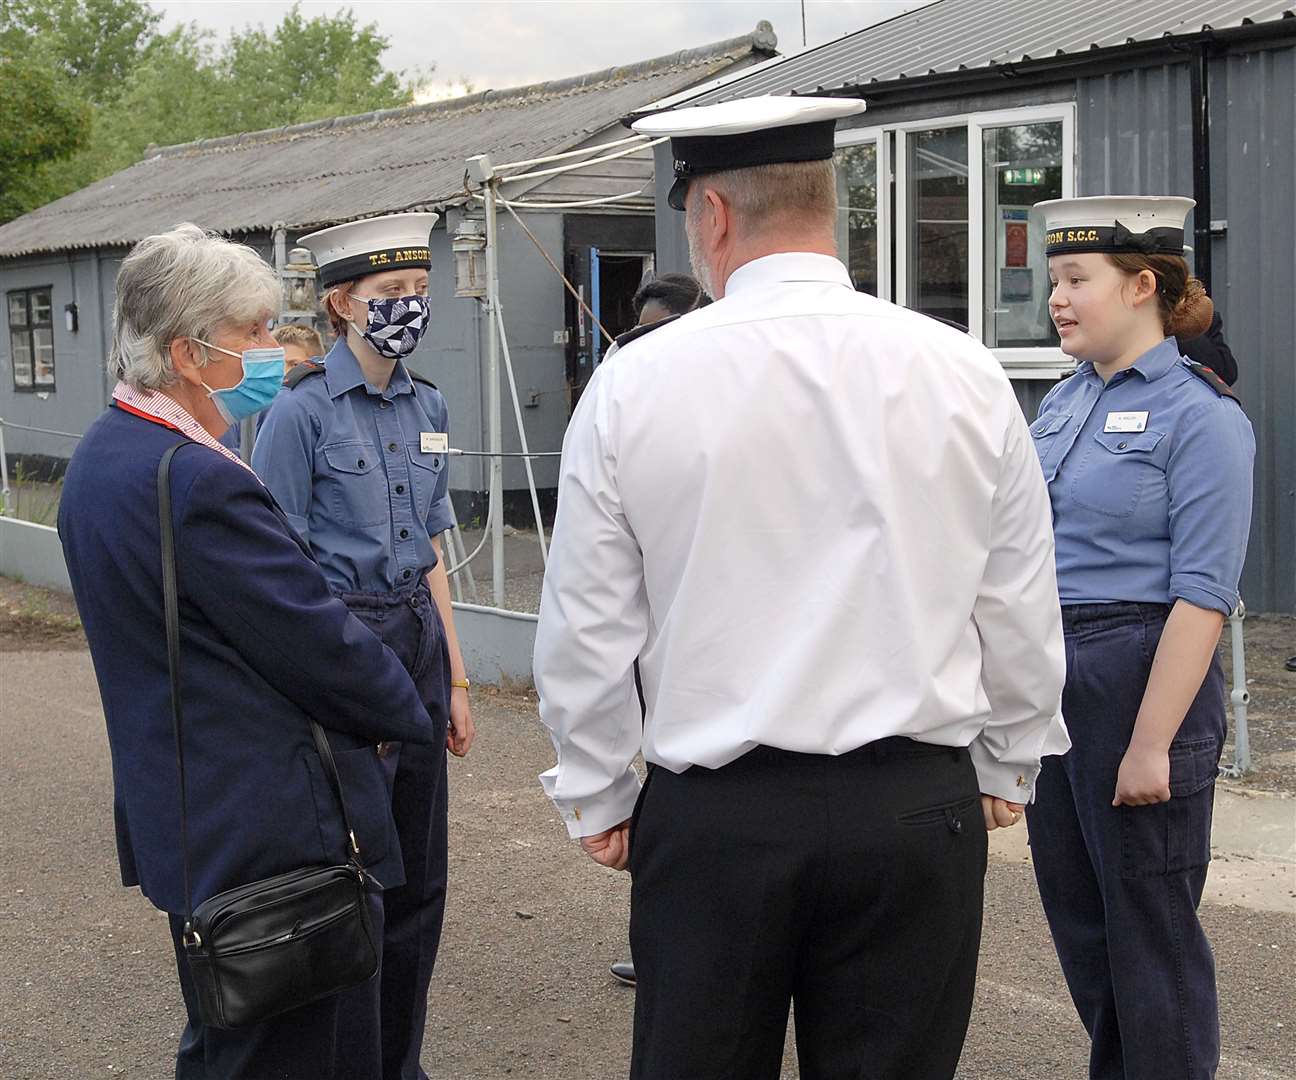 The chairman of Kent County Council, Ann Allen, paid a visit to the Dartford and Crayford Sea Cadets. Ann Allen MBE meeting Cdt 1st Class Millie